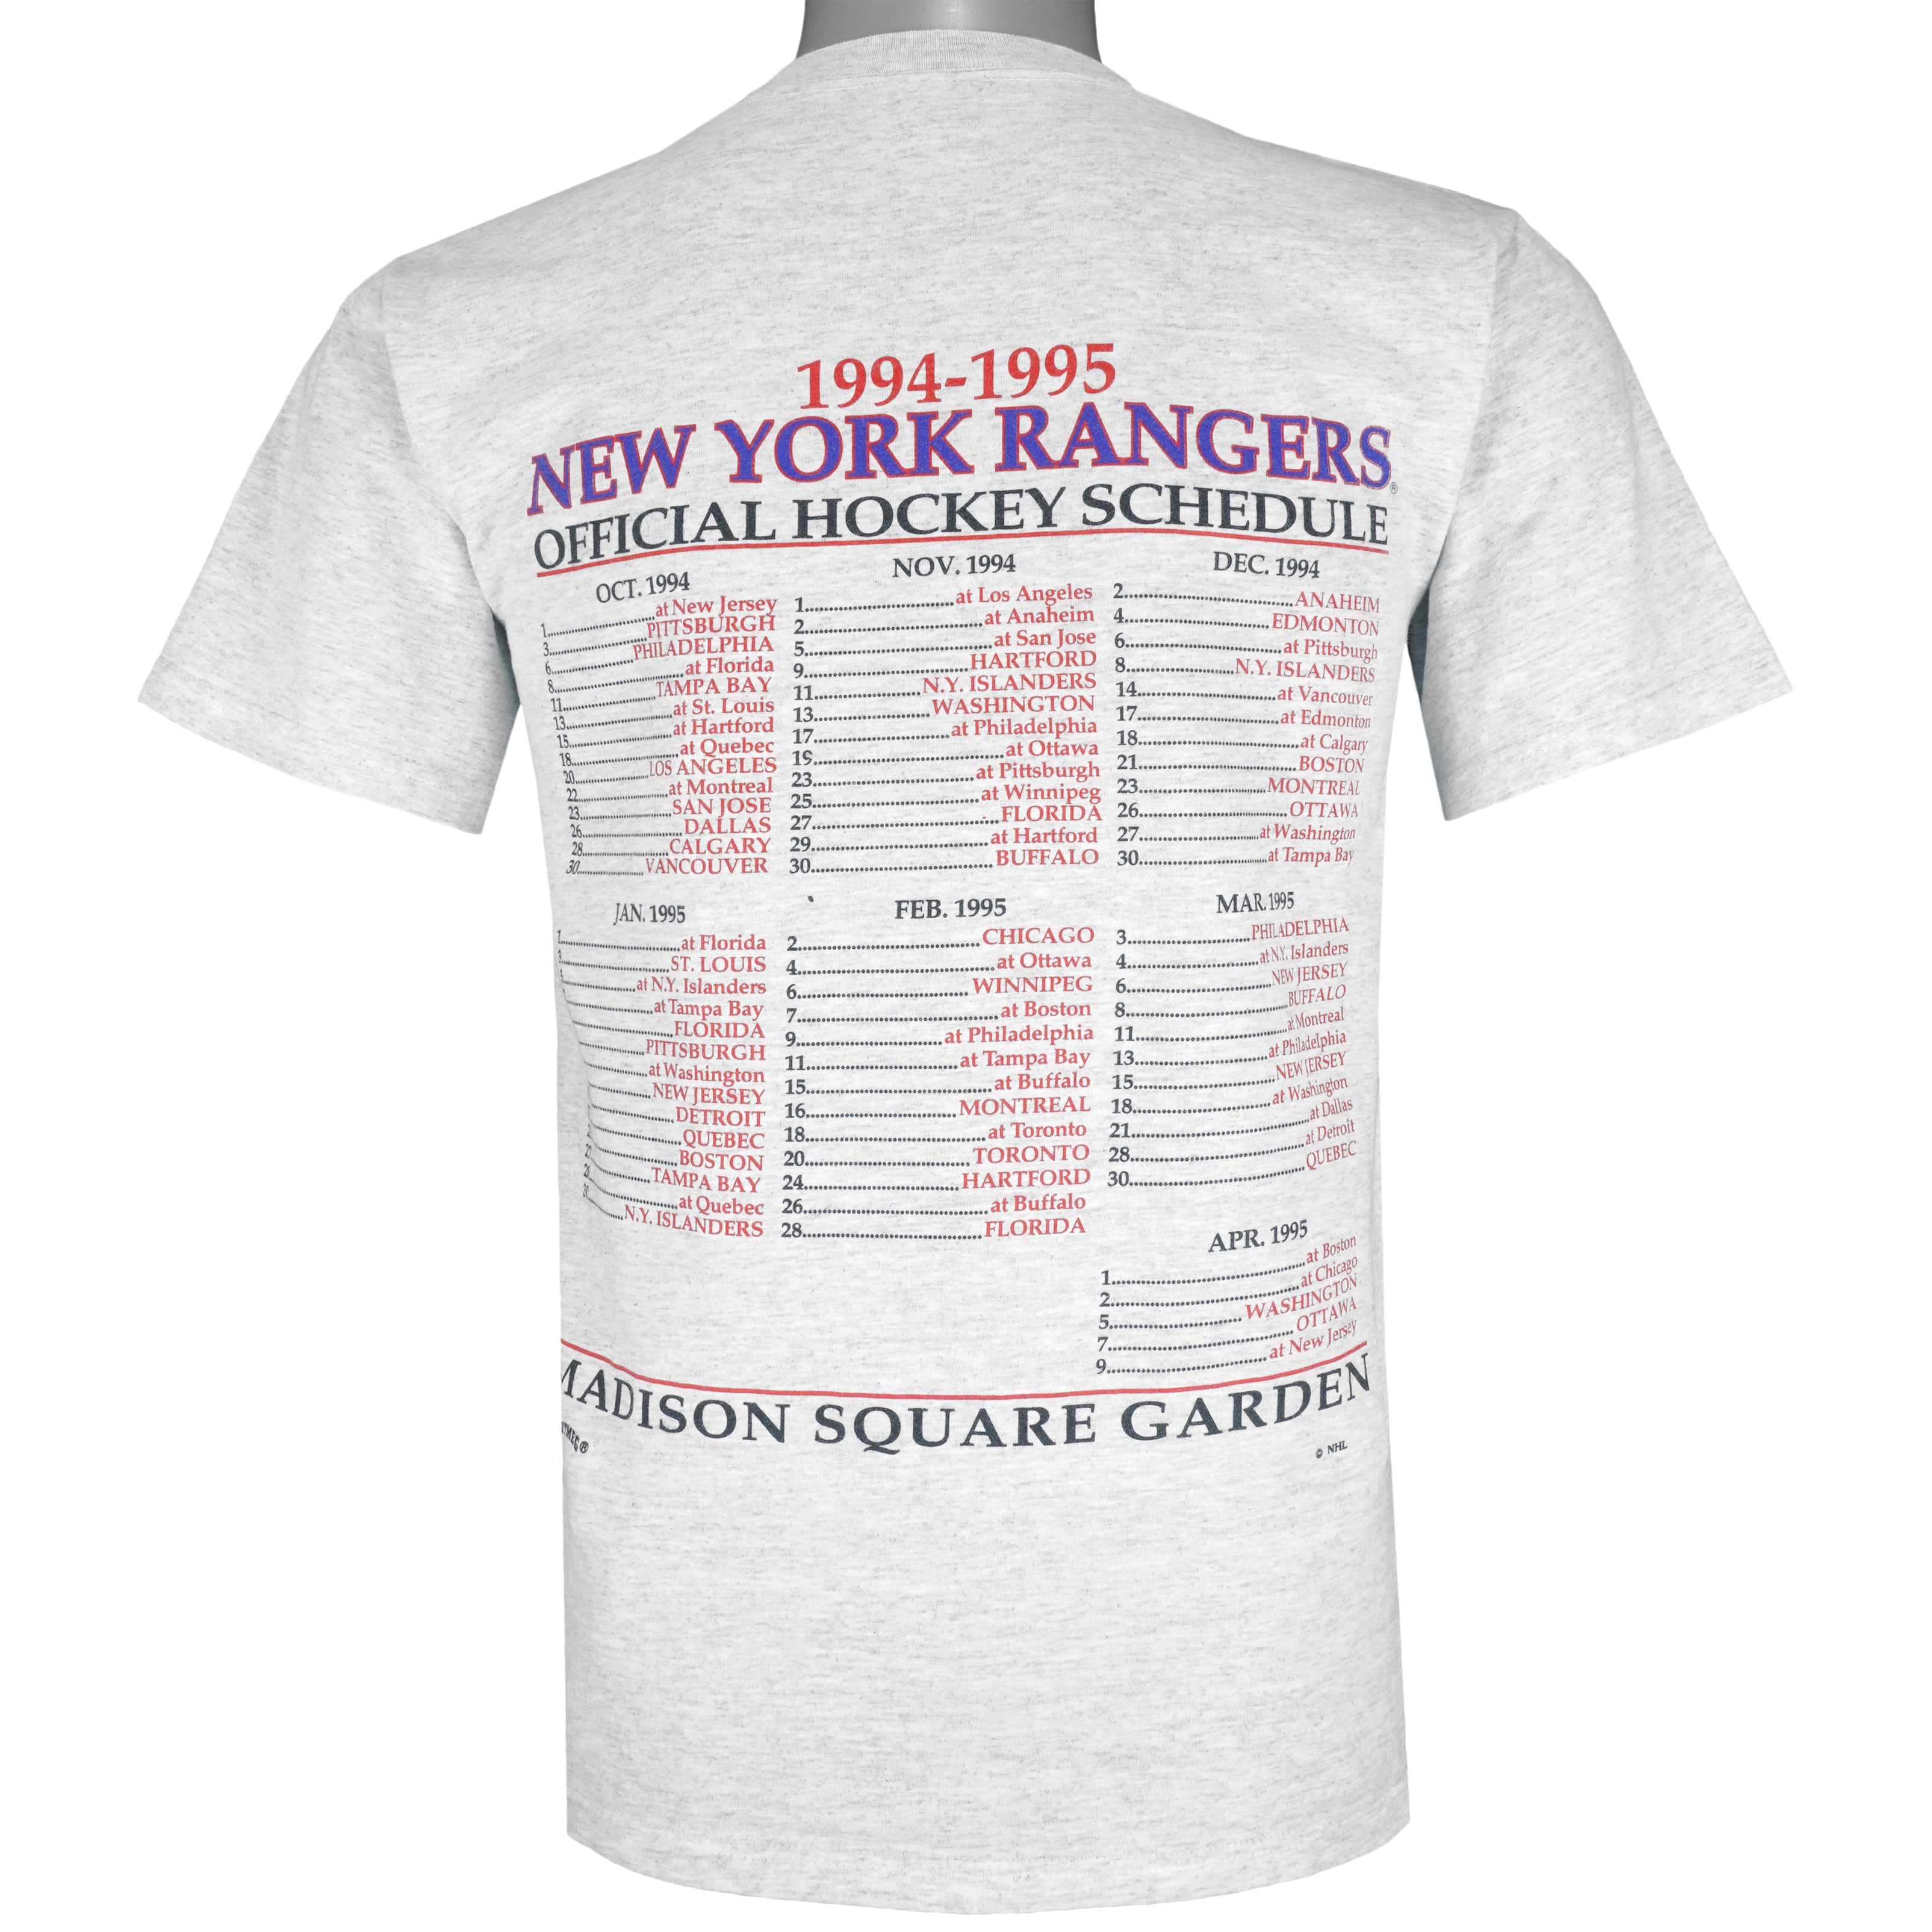 Vintage 1994 Stanley Cup Champions NY Rangers T-shirt 